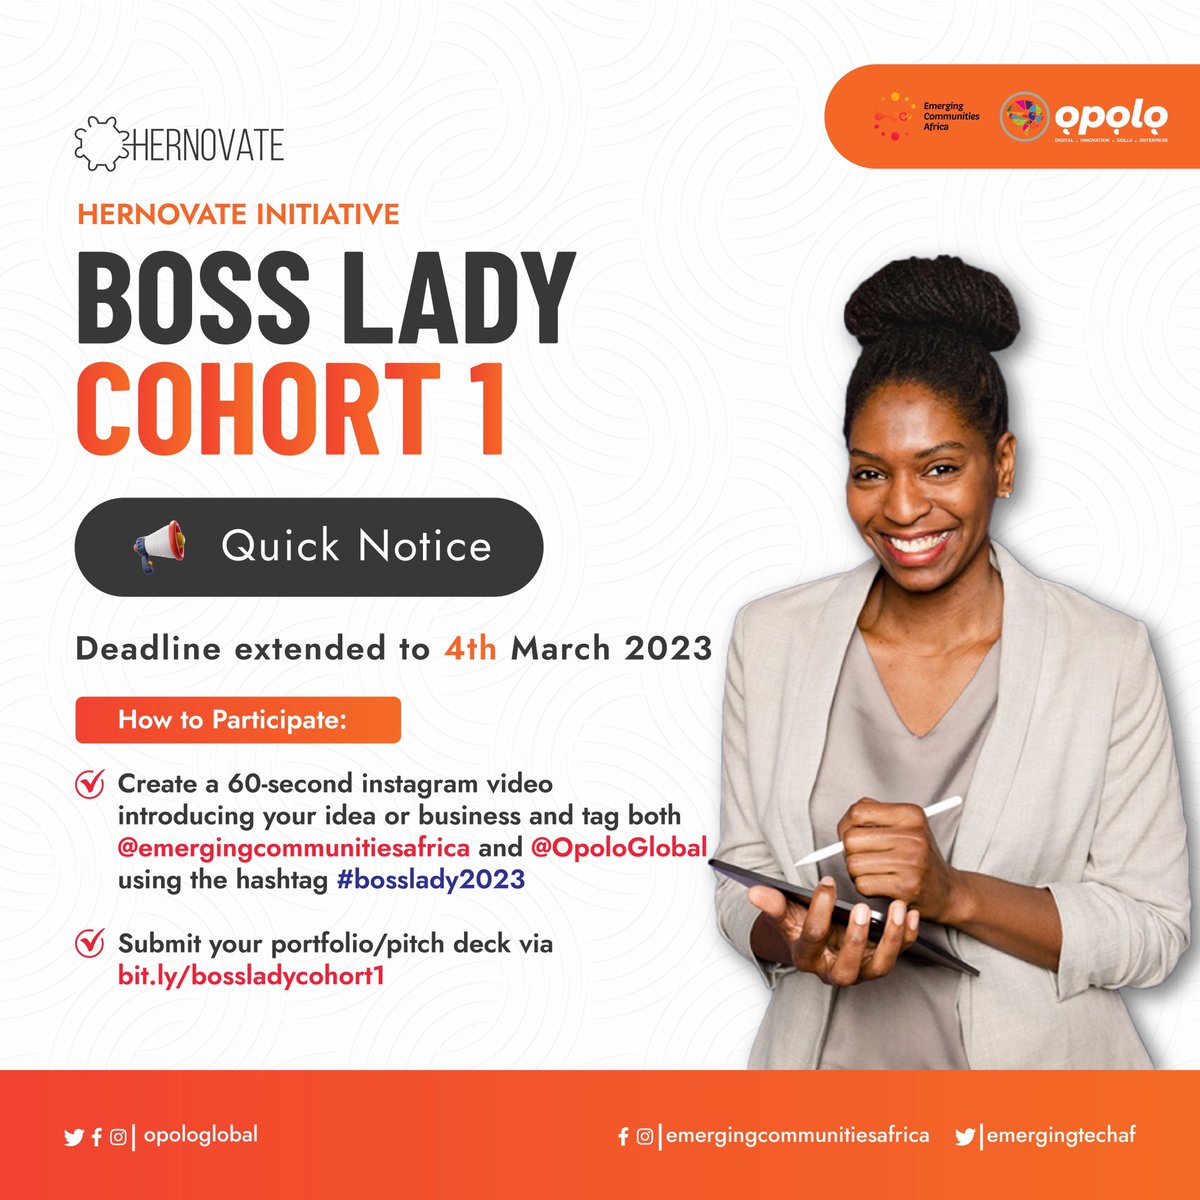 #newsupdate‼️ 

The deadline for the #bosslady2023 application has been extended to March 4th, 2023.

Good luck!

#opologlobal #emergingcommunitiesafrica #bossladycohort1 #hernovate #femaleentrepreneur